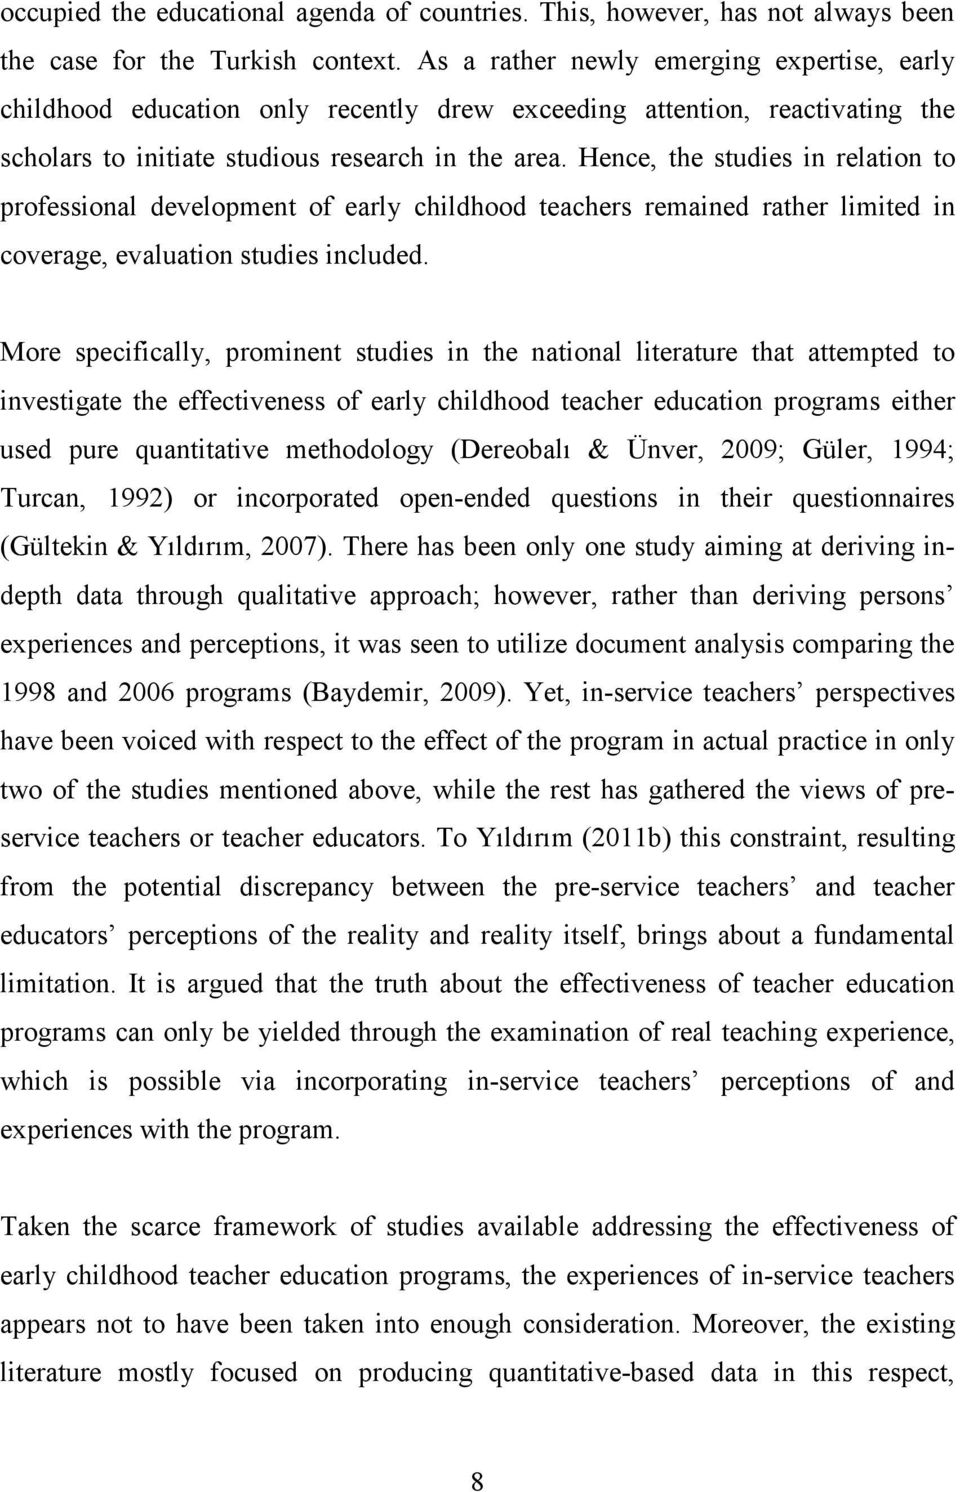 Hence, the studies in relation to professional development of early childhood teachers remained rather limited in coverage, evaluation studies included.